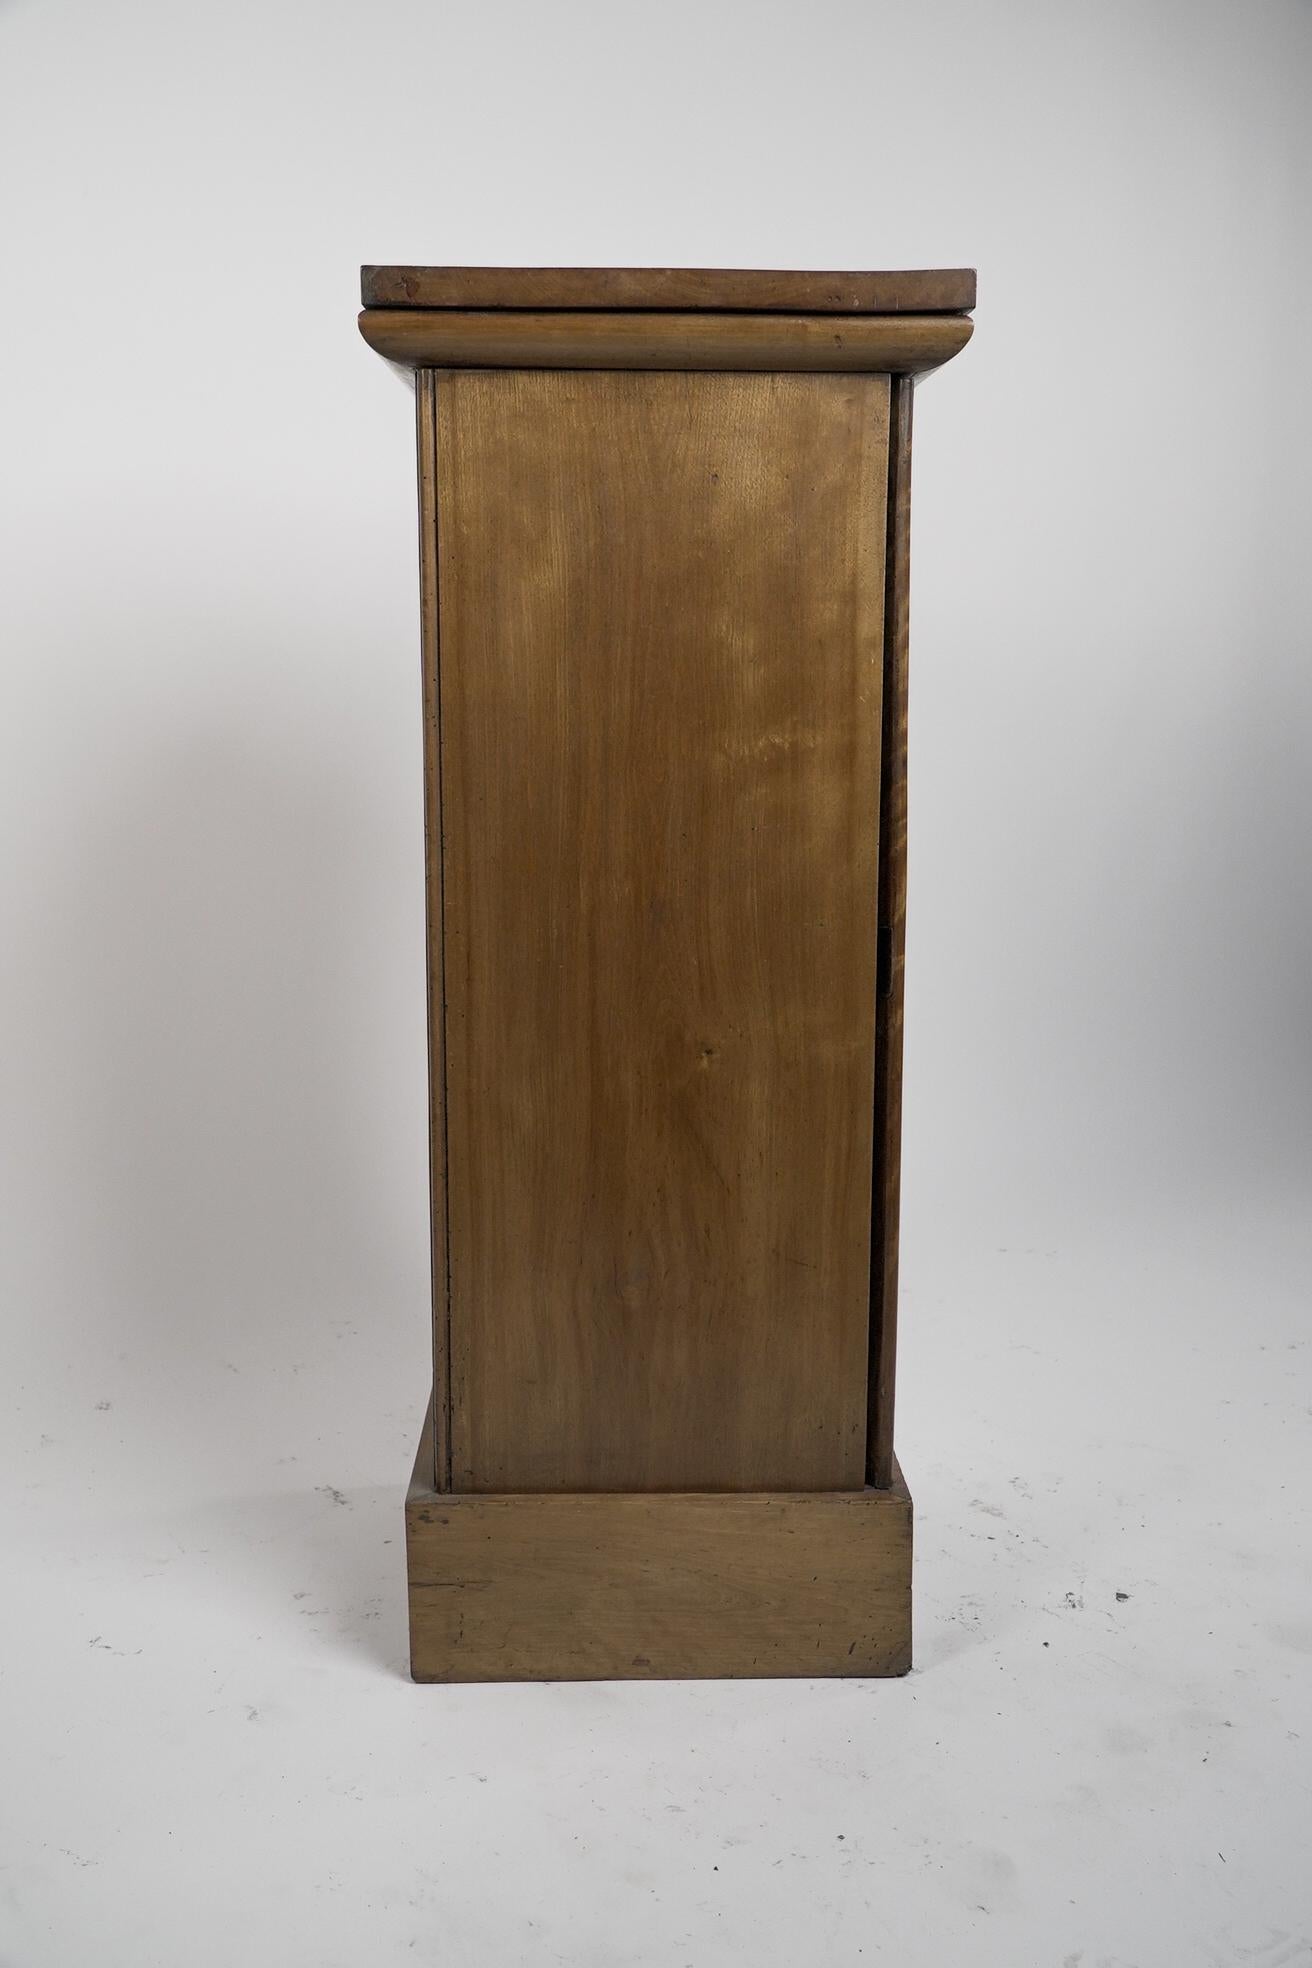 Late 19th Century An Aesthetic Movement Satin Birch bedside cabinet with a central Walnut handle. For Sale